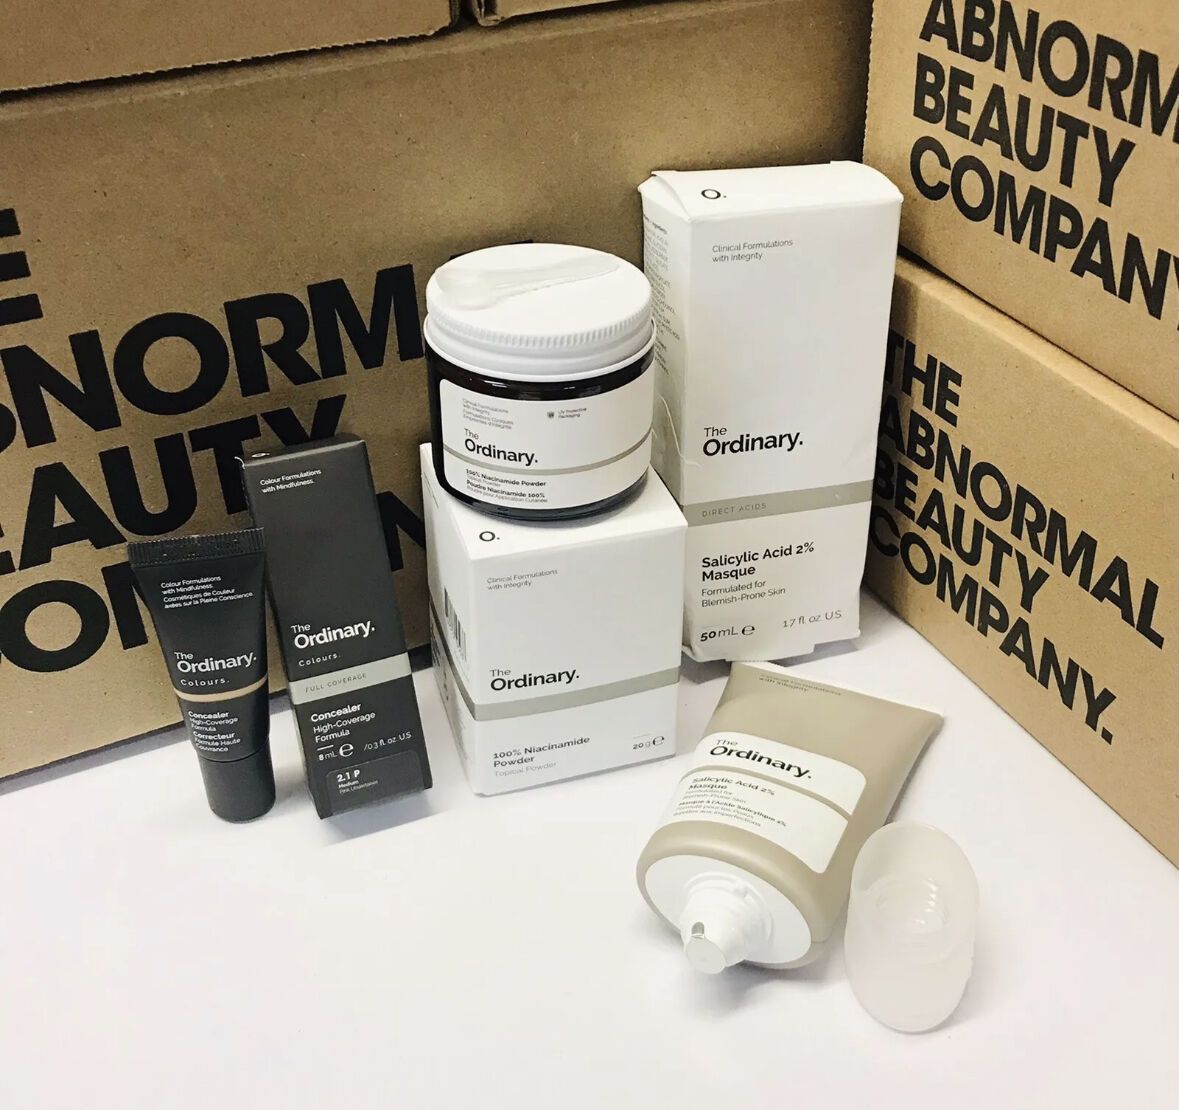 The Ordinary Hair + Body Care Product available